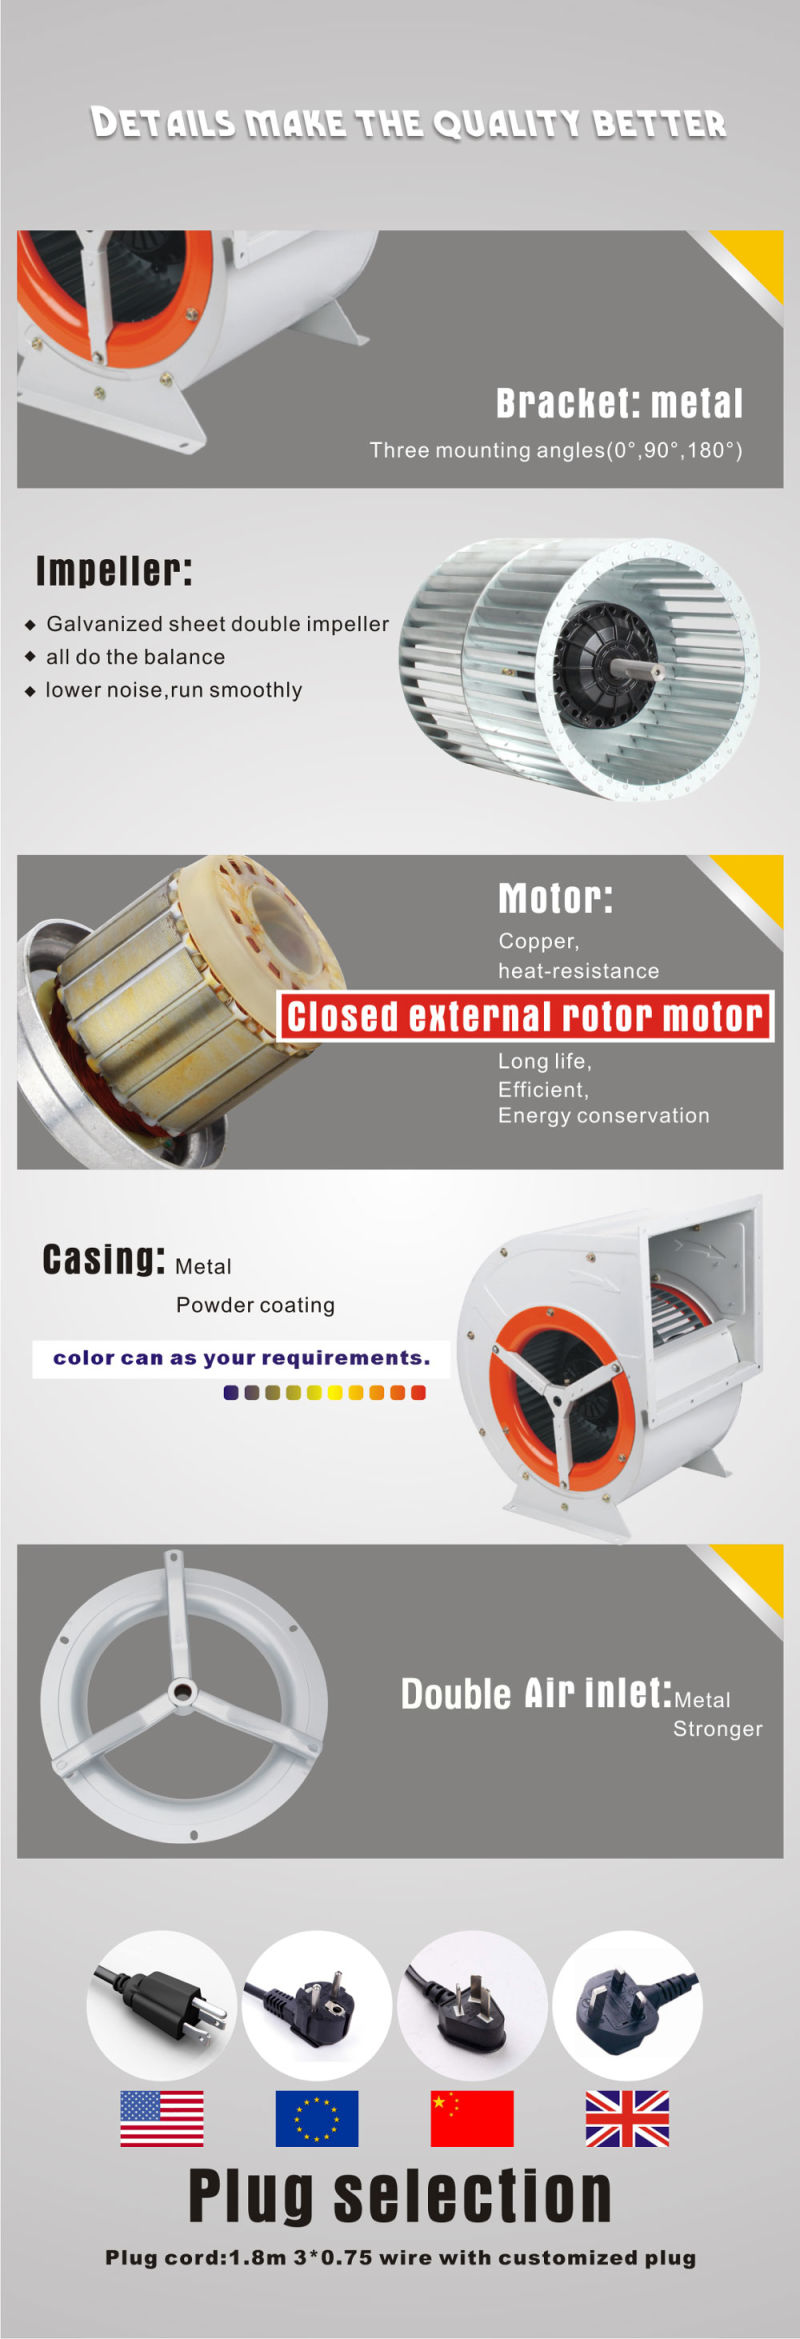 280mm Size High Quality Air Conditioning Blower Fan Suitable for HVAC